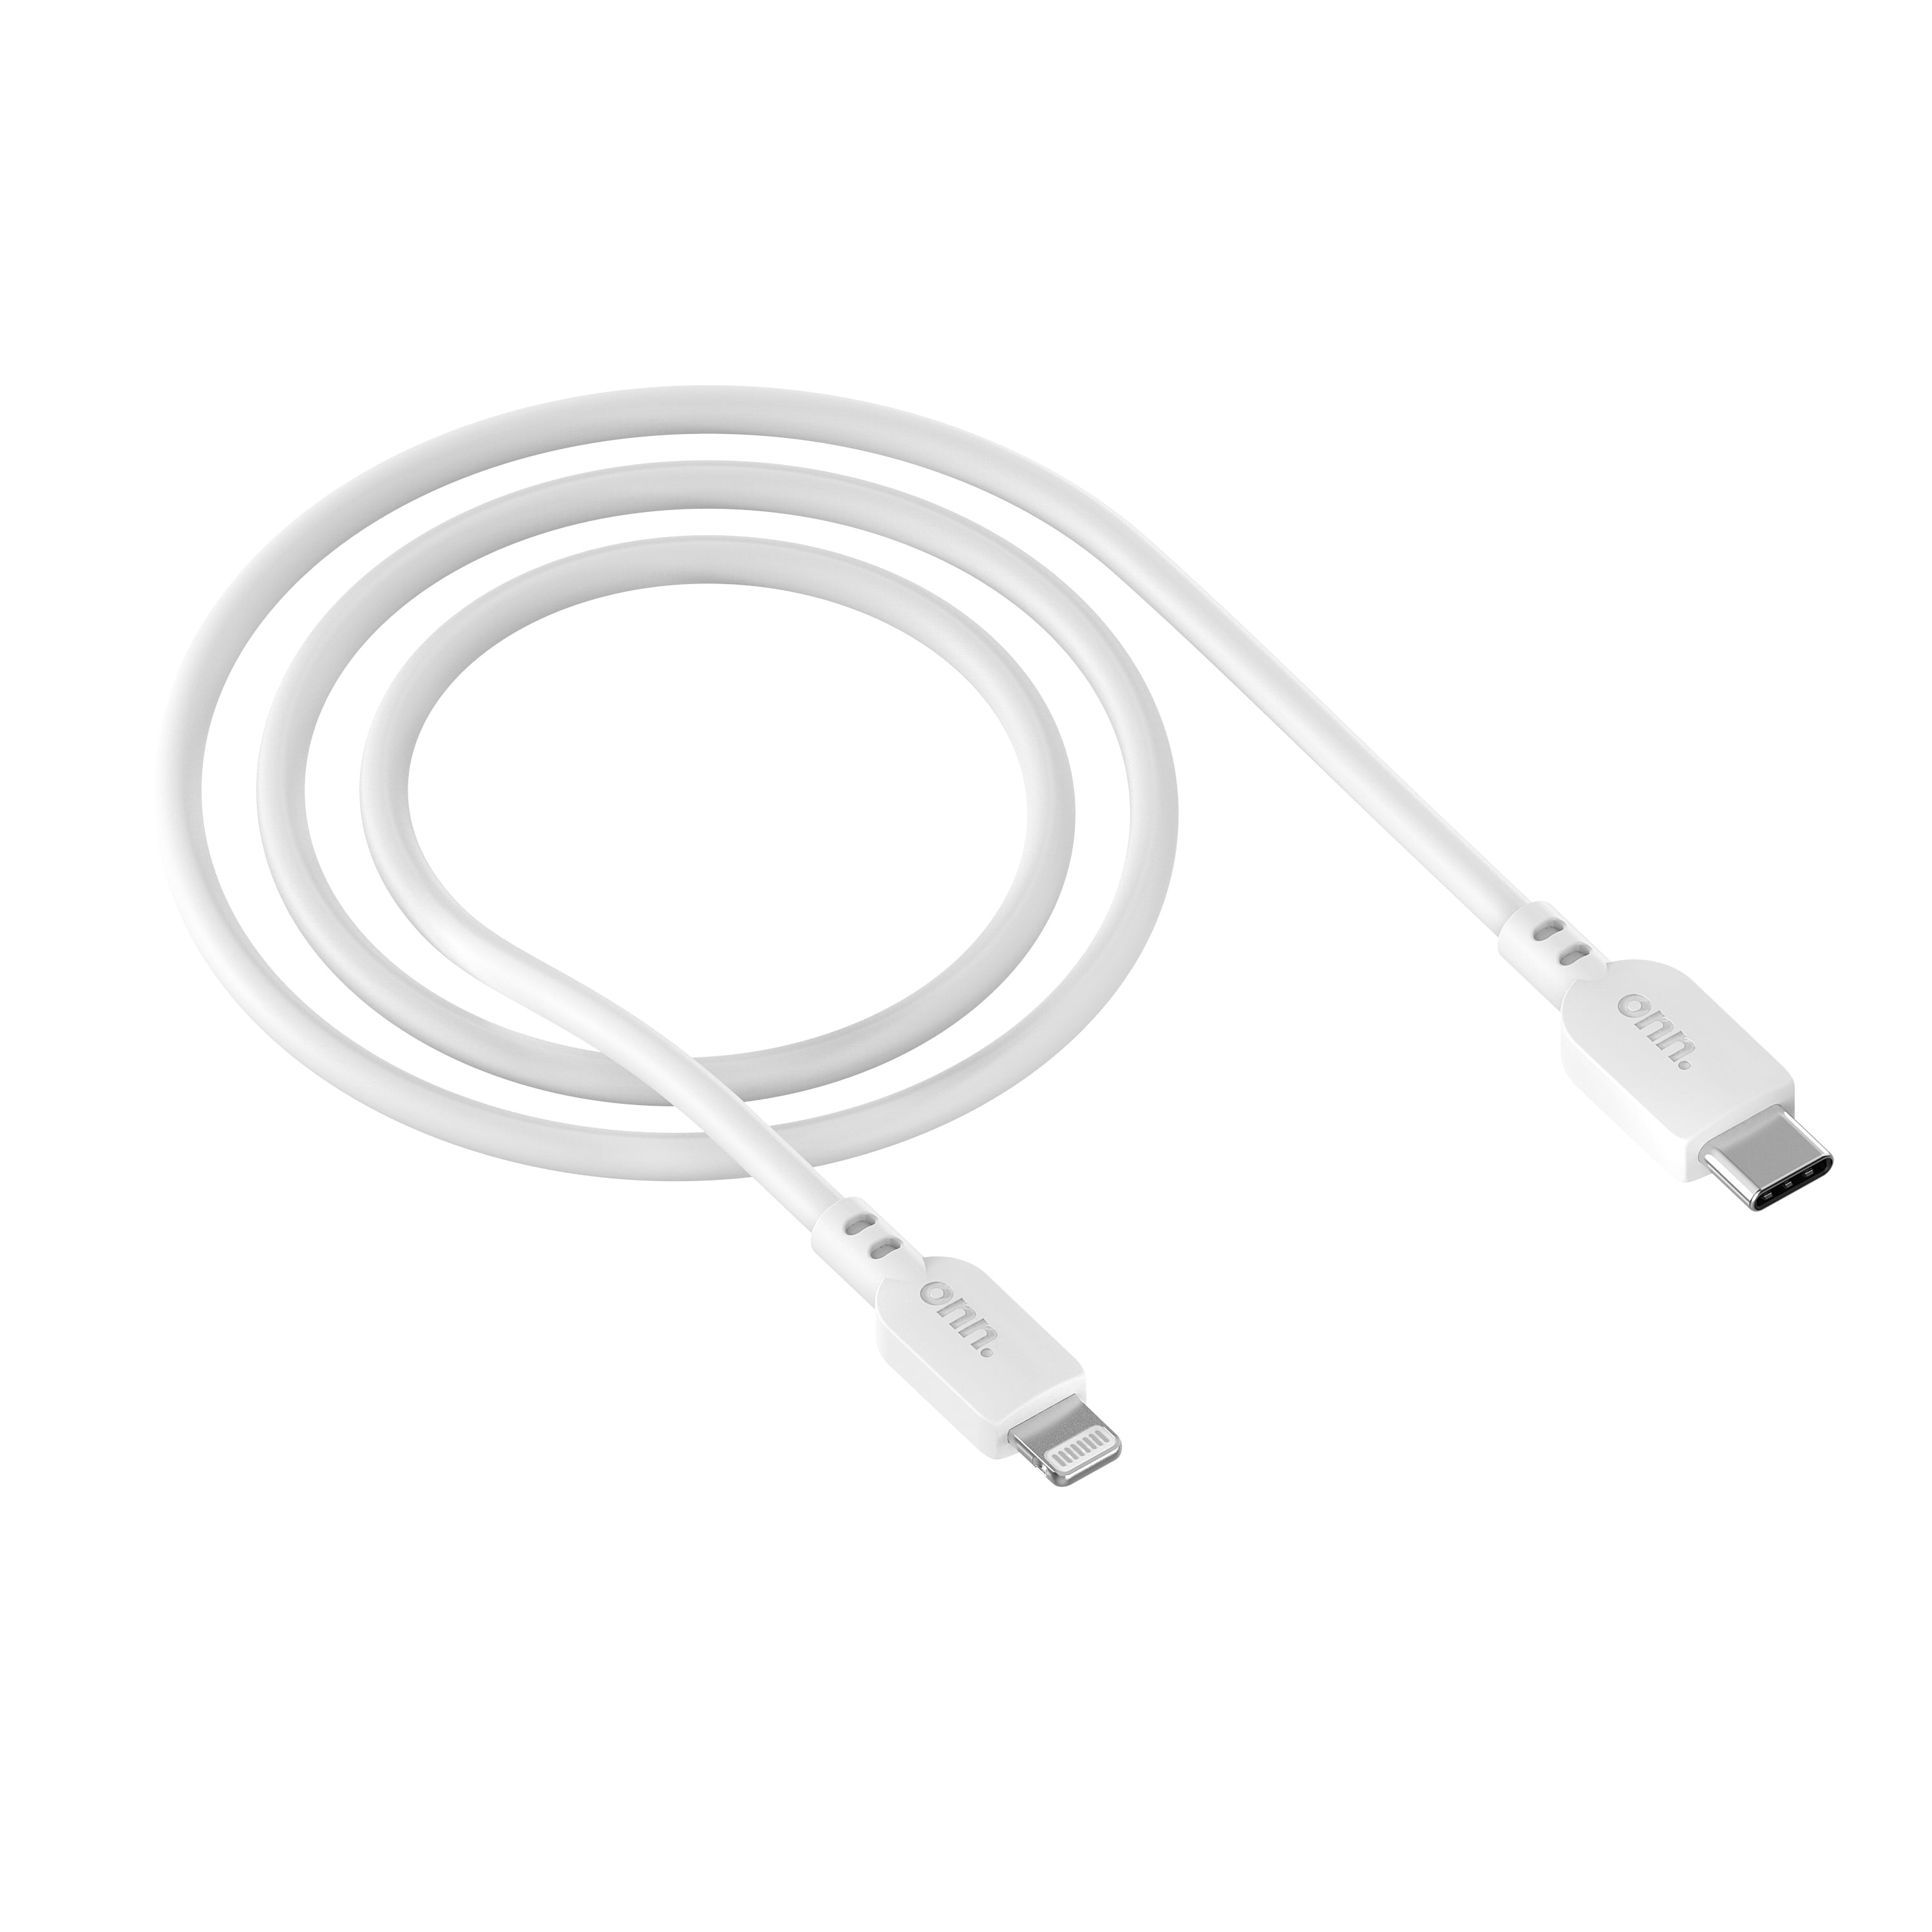 Onn. 3 feet Lightning to USB-C Charging and Data Cable for iPhone